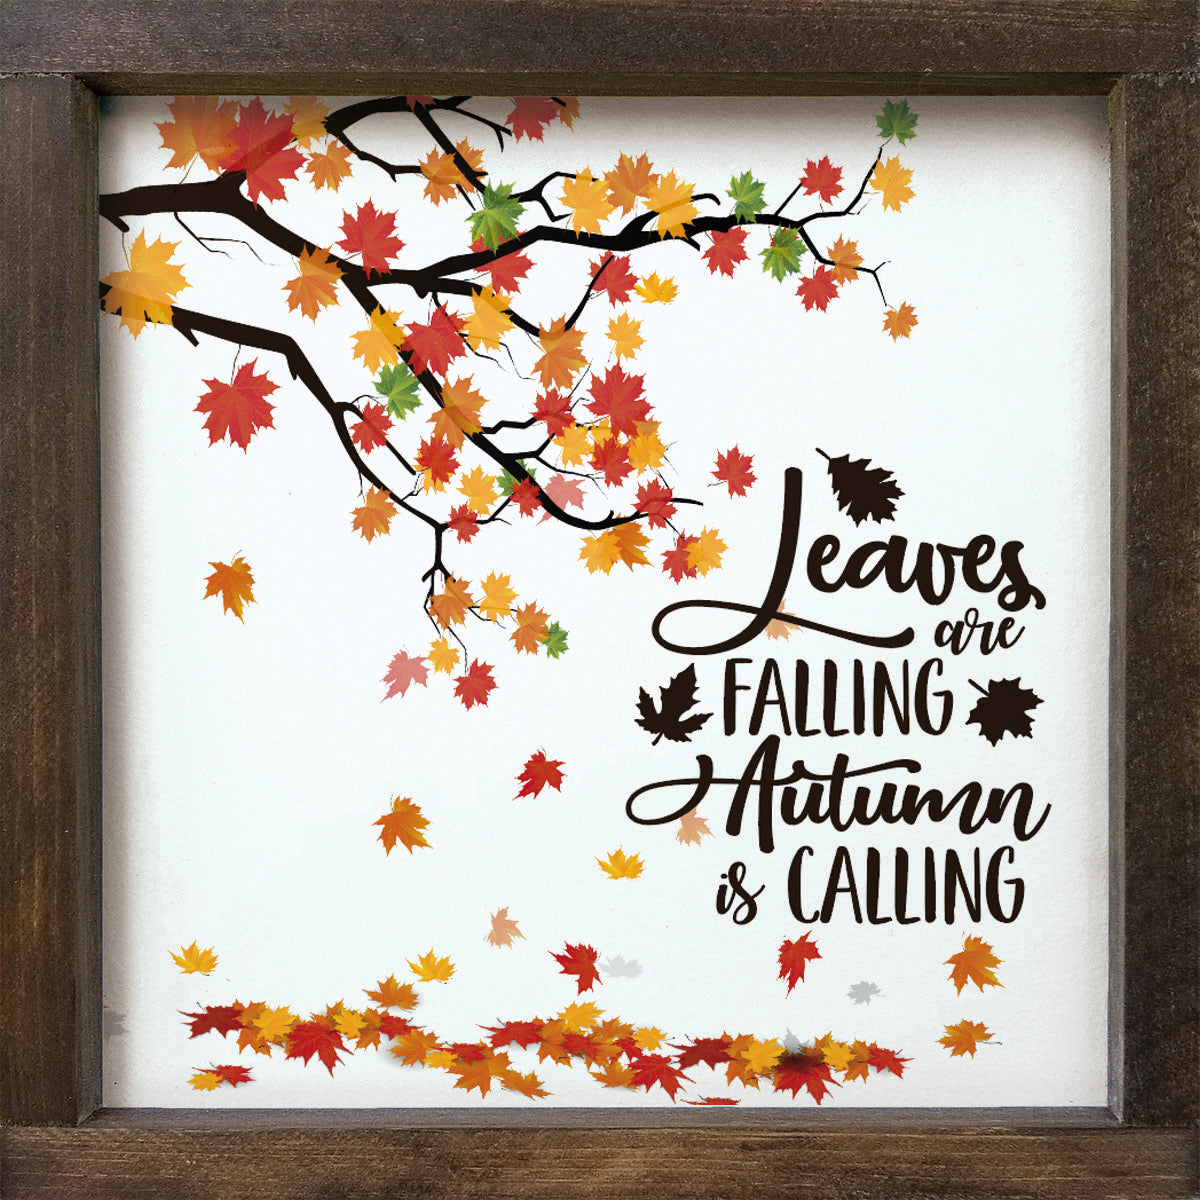 Autumn Leaves are Calling Wood Sign -12